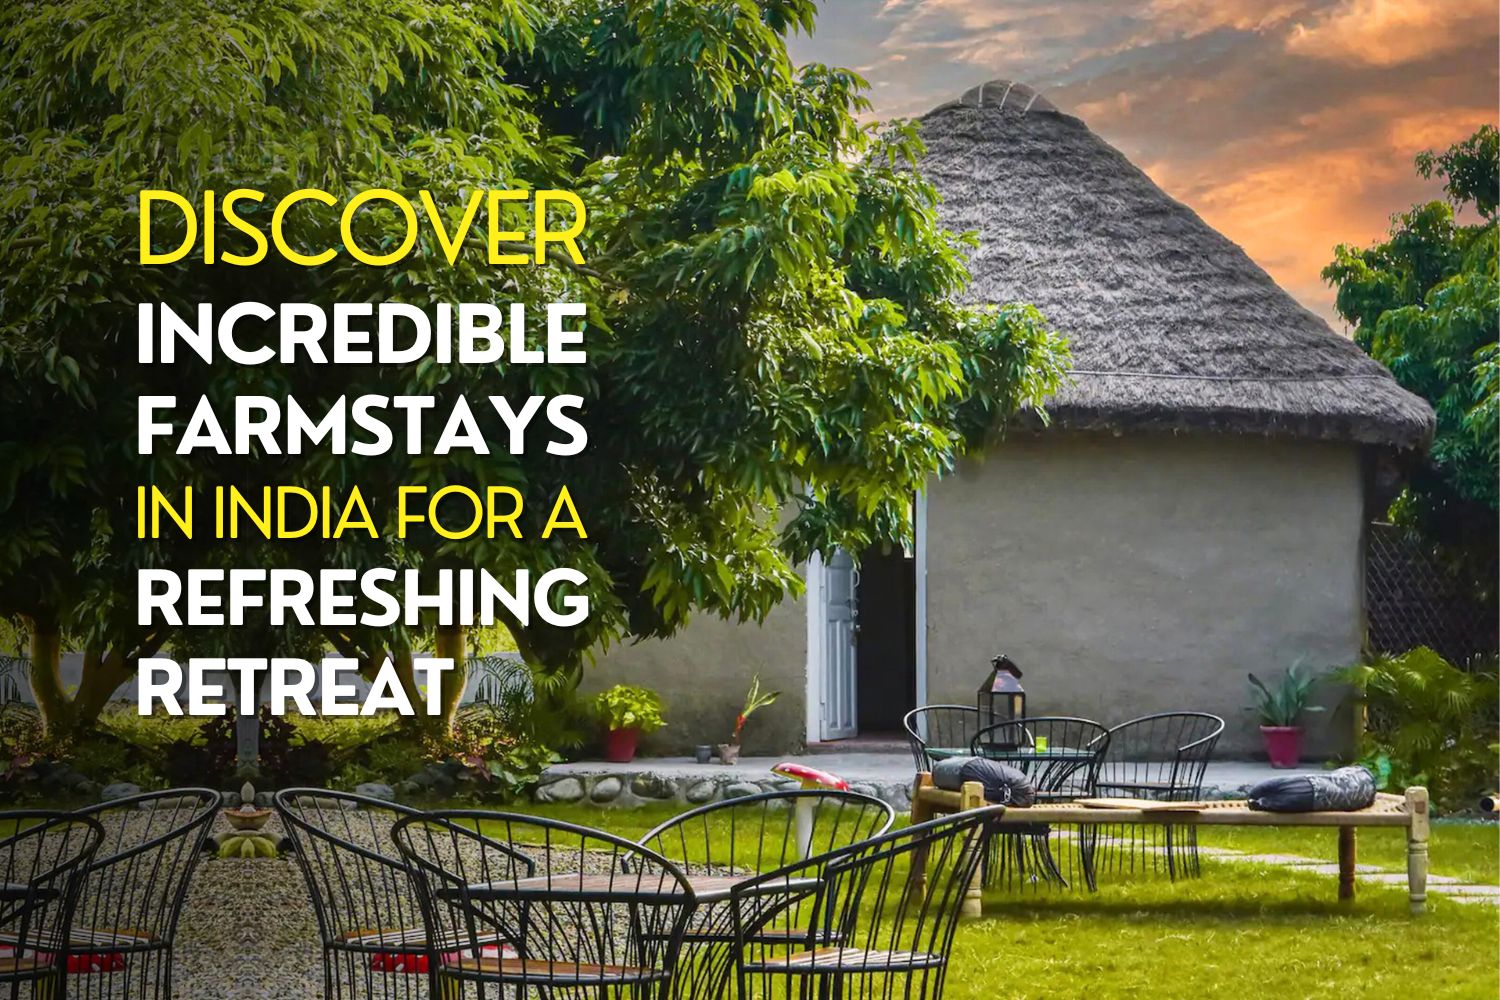 Discover Incredible Farmstays in India for a Refreshing Retreat